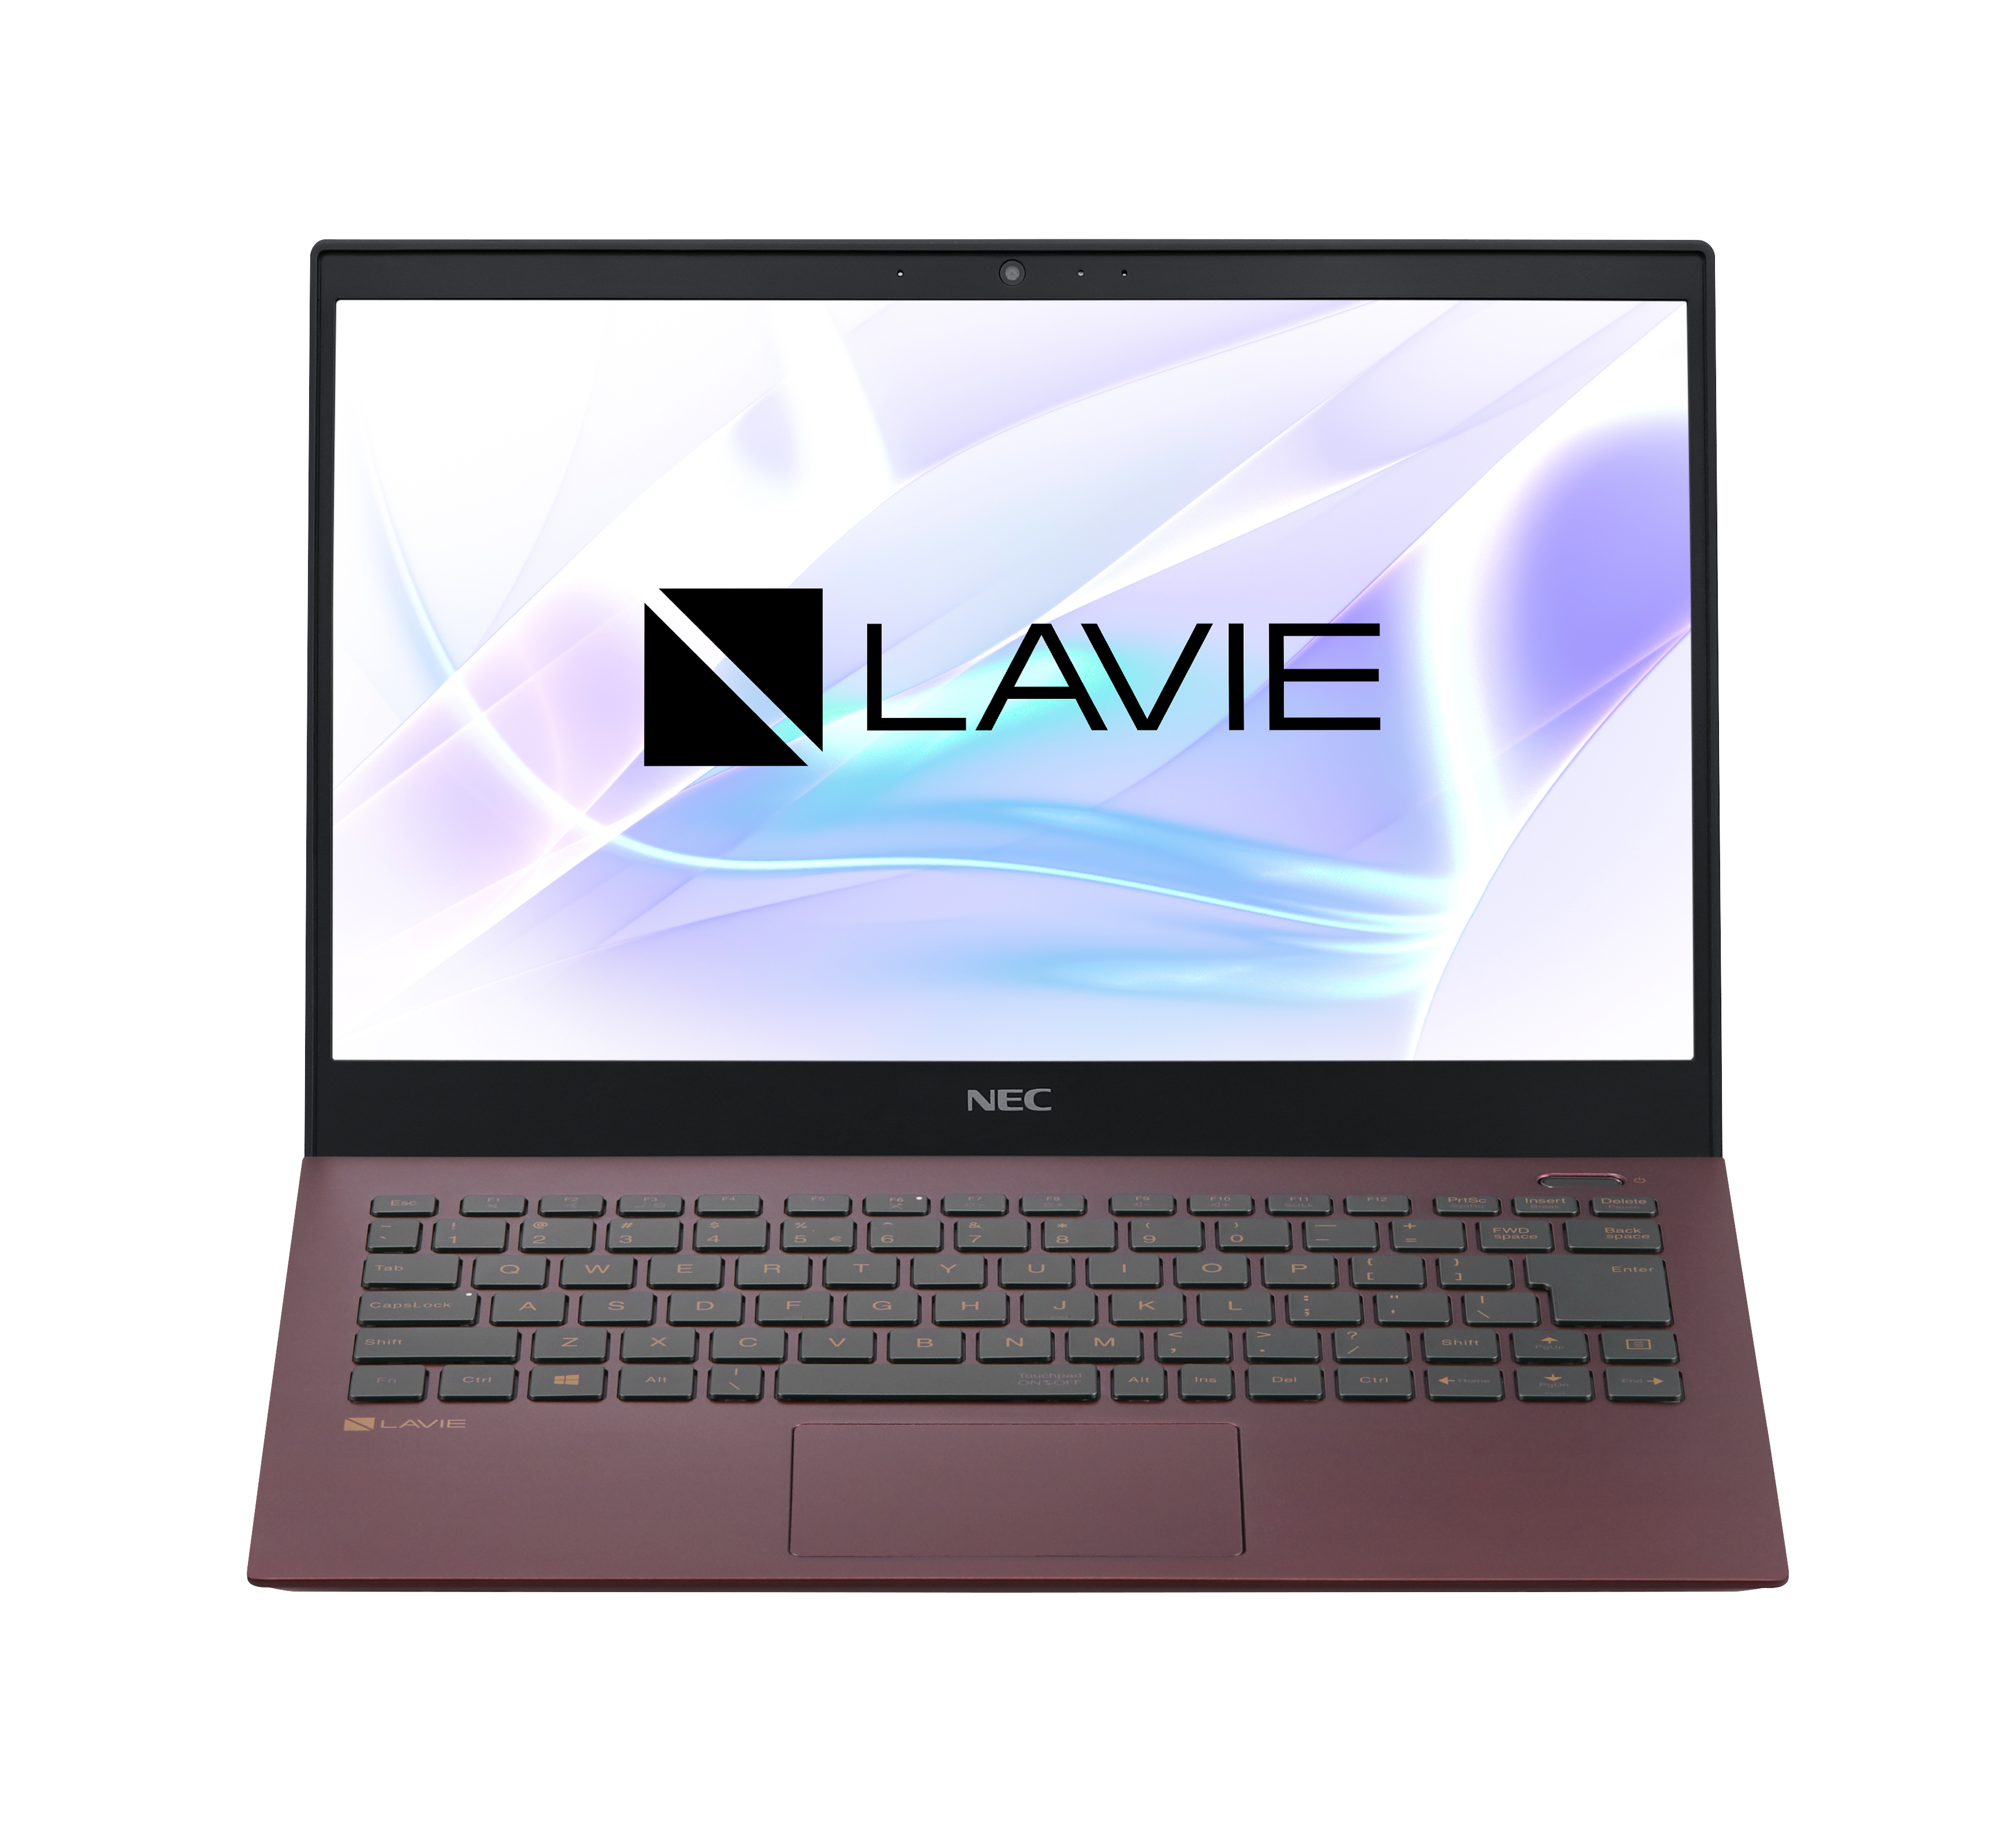 The NEC Lavie Pro Mobile is a stylish Ultrabook under 1 kg 